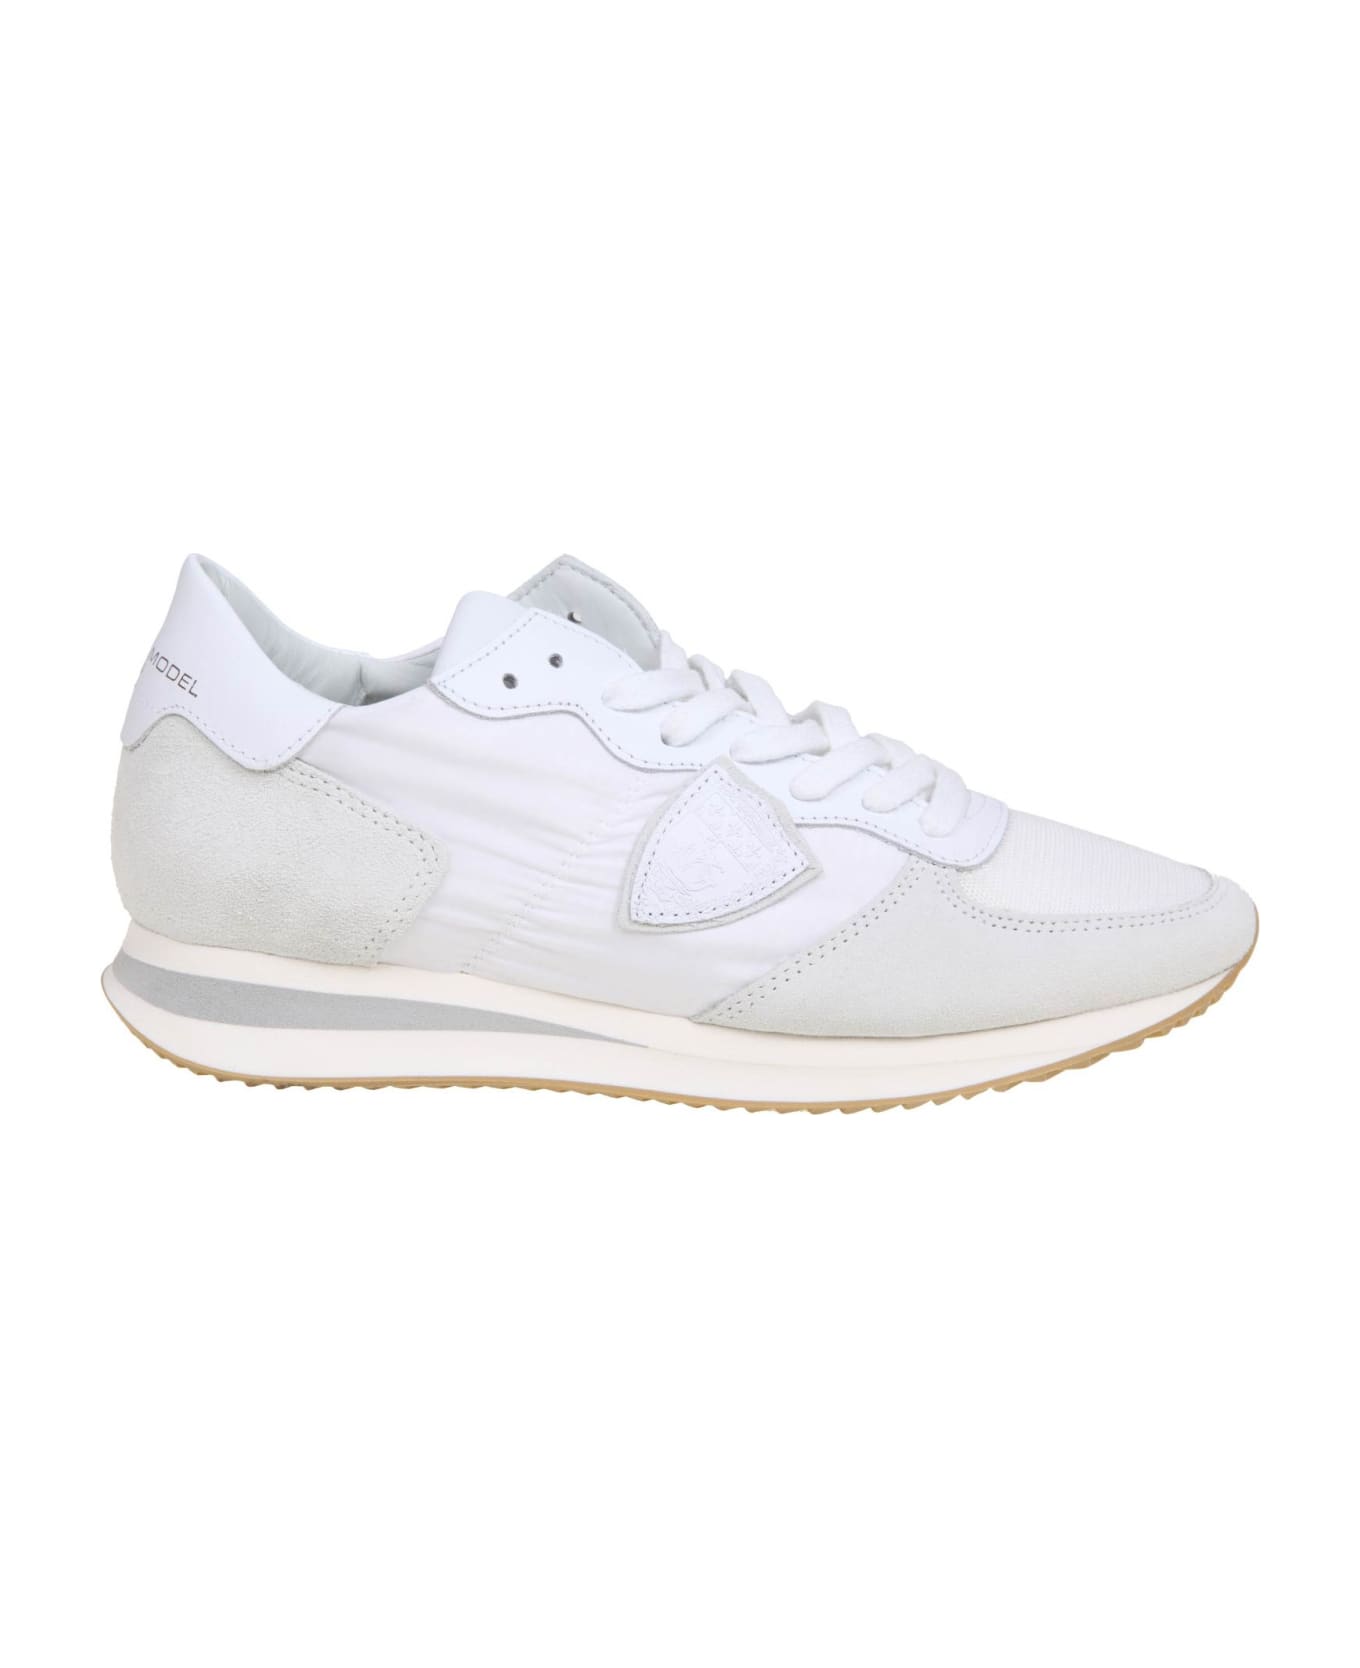 Philippe Model Trpx Sneakers In Suede And Nylon - WHITE